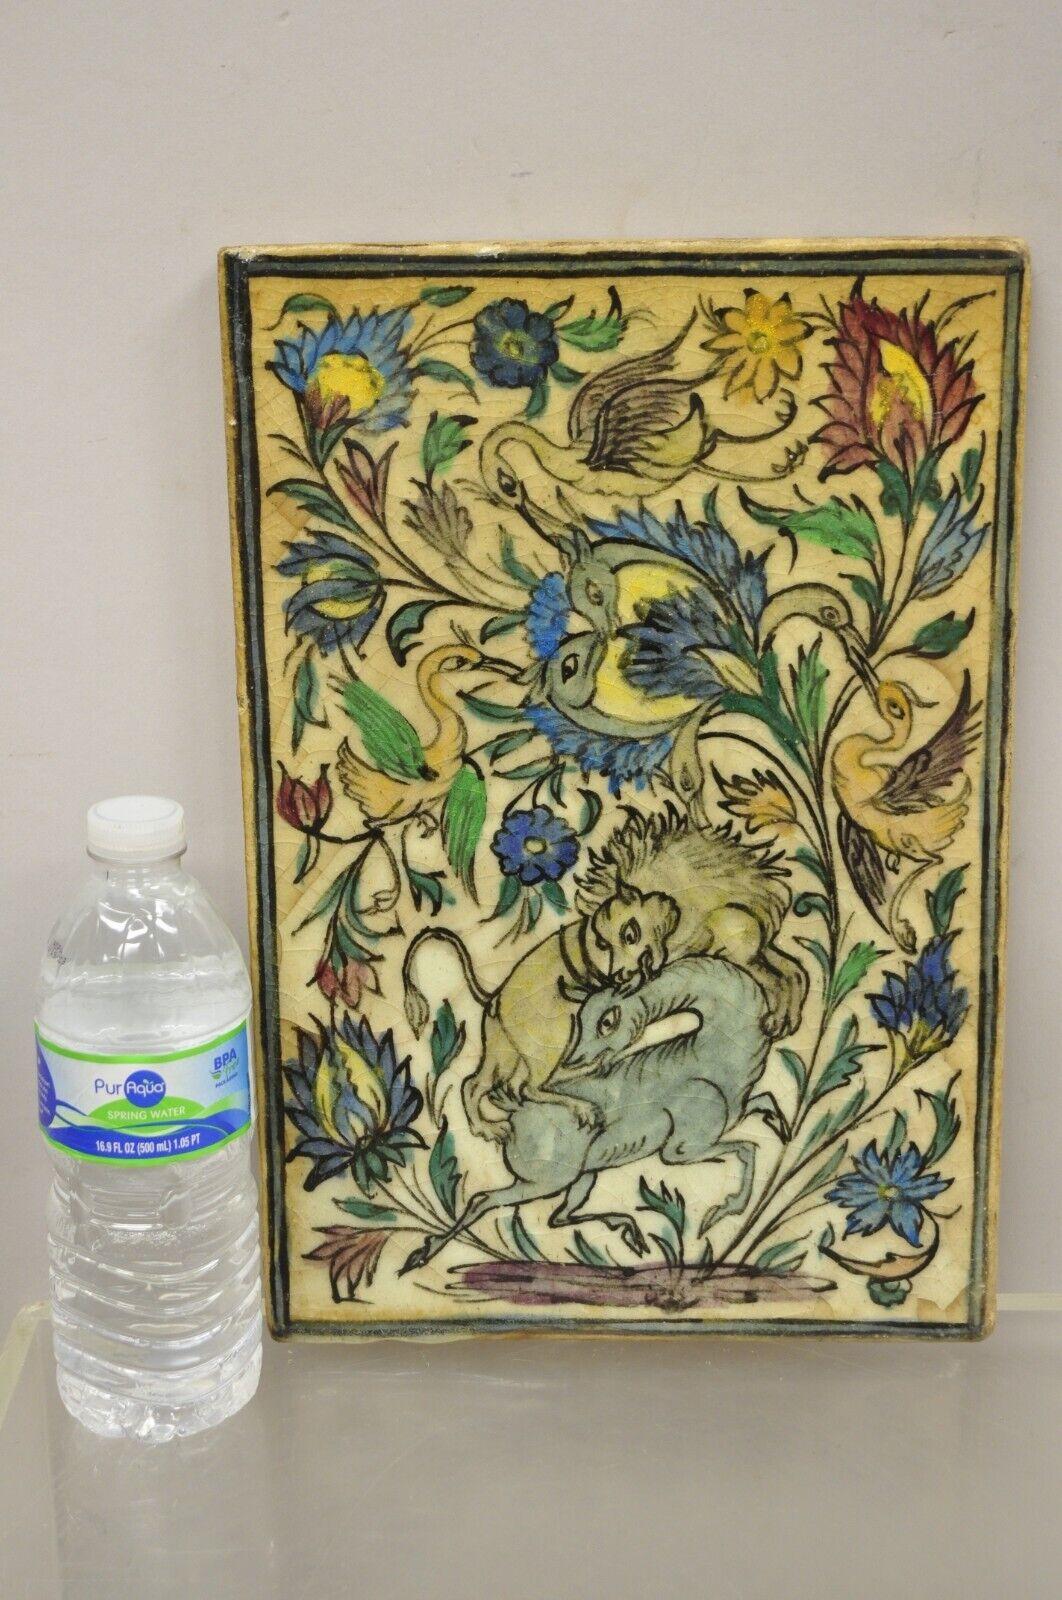 Item: Antique Persian Iznik Qajar Style Large Ceramic Pottery Tile Animals Predation Hunt Scene C1. Item features an original crackle glazed finish, heavy ceramic pottery construction, very impressive detail, wonderful style and form. Great to mount